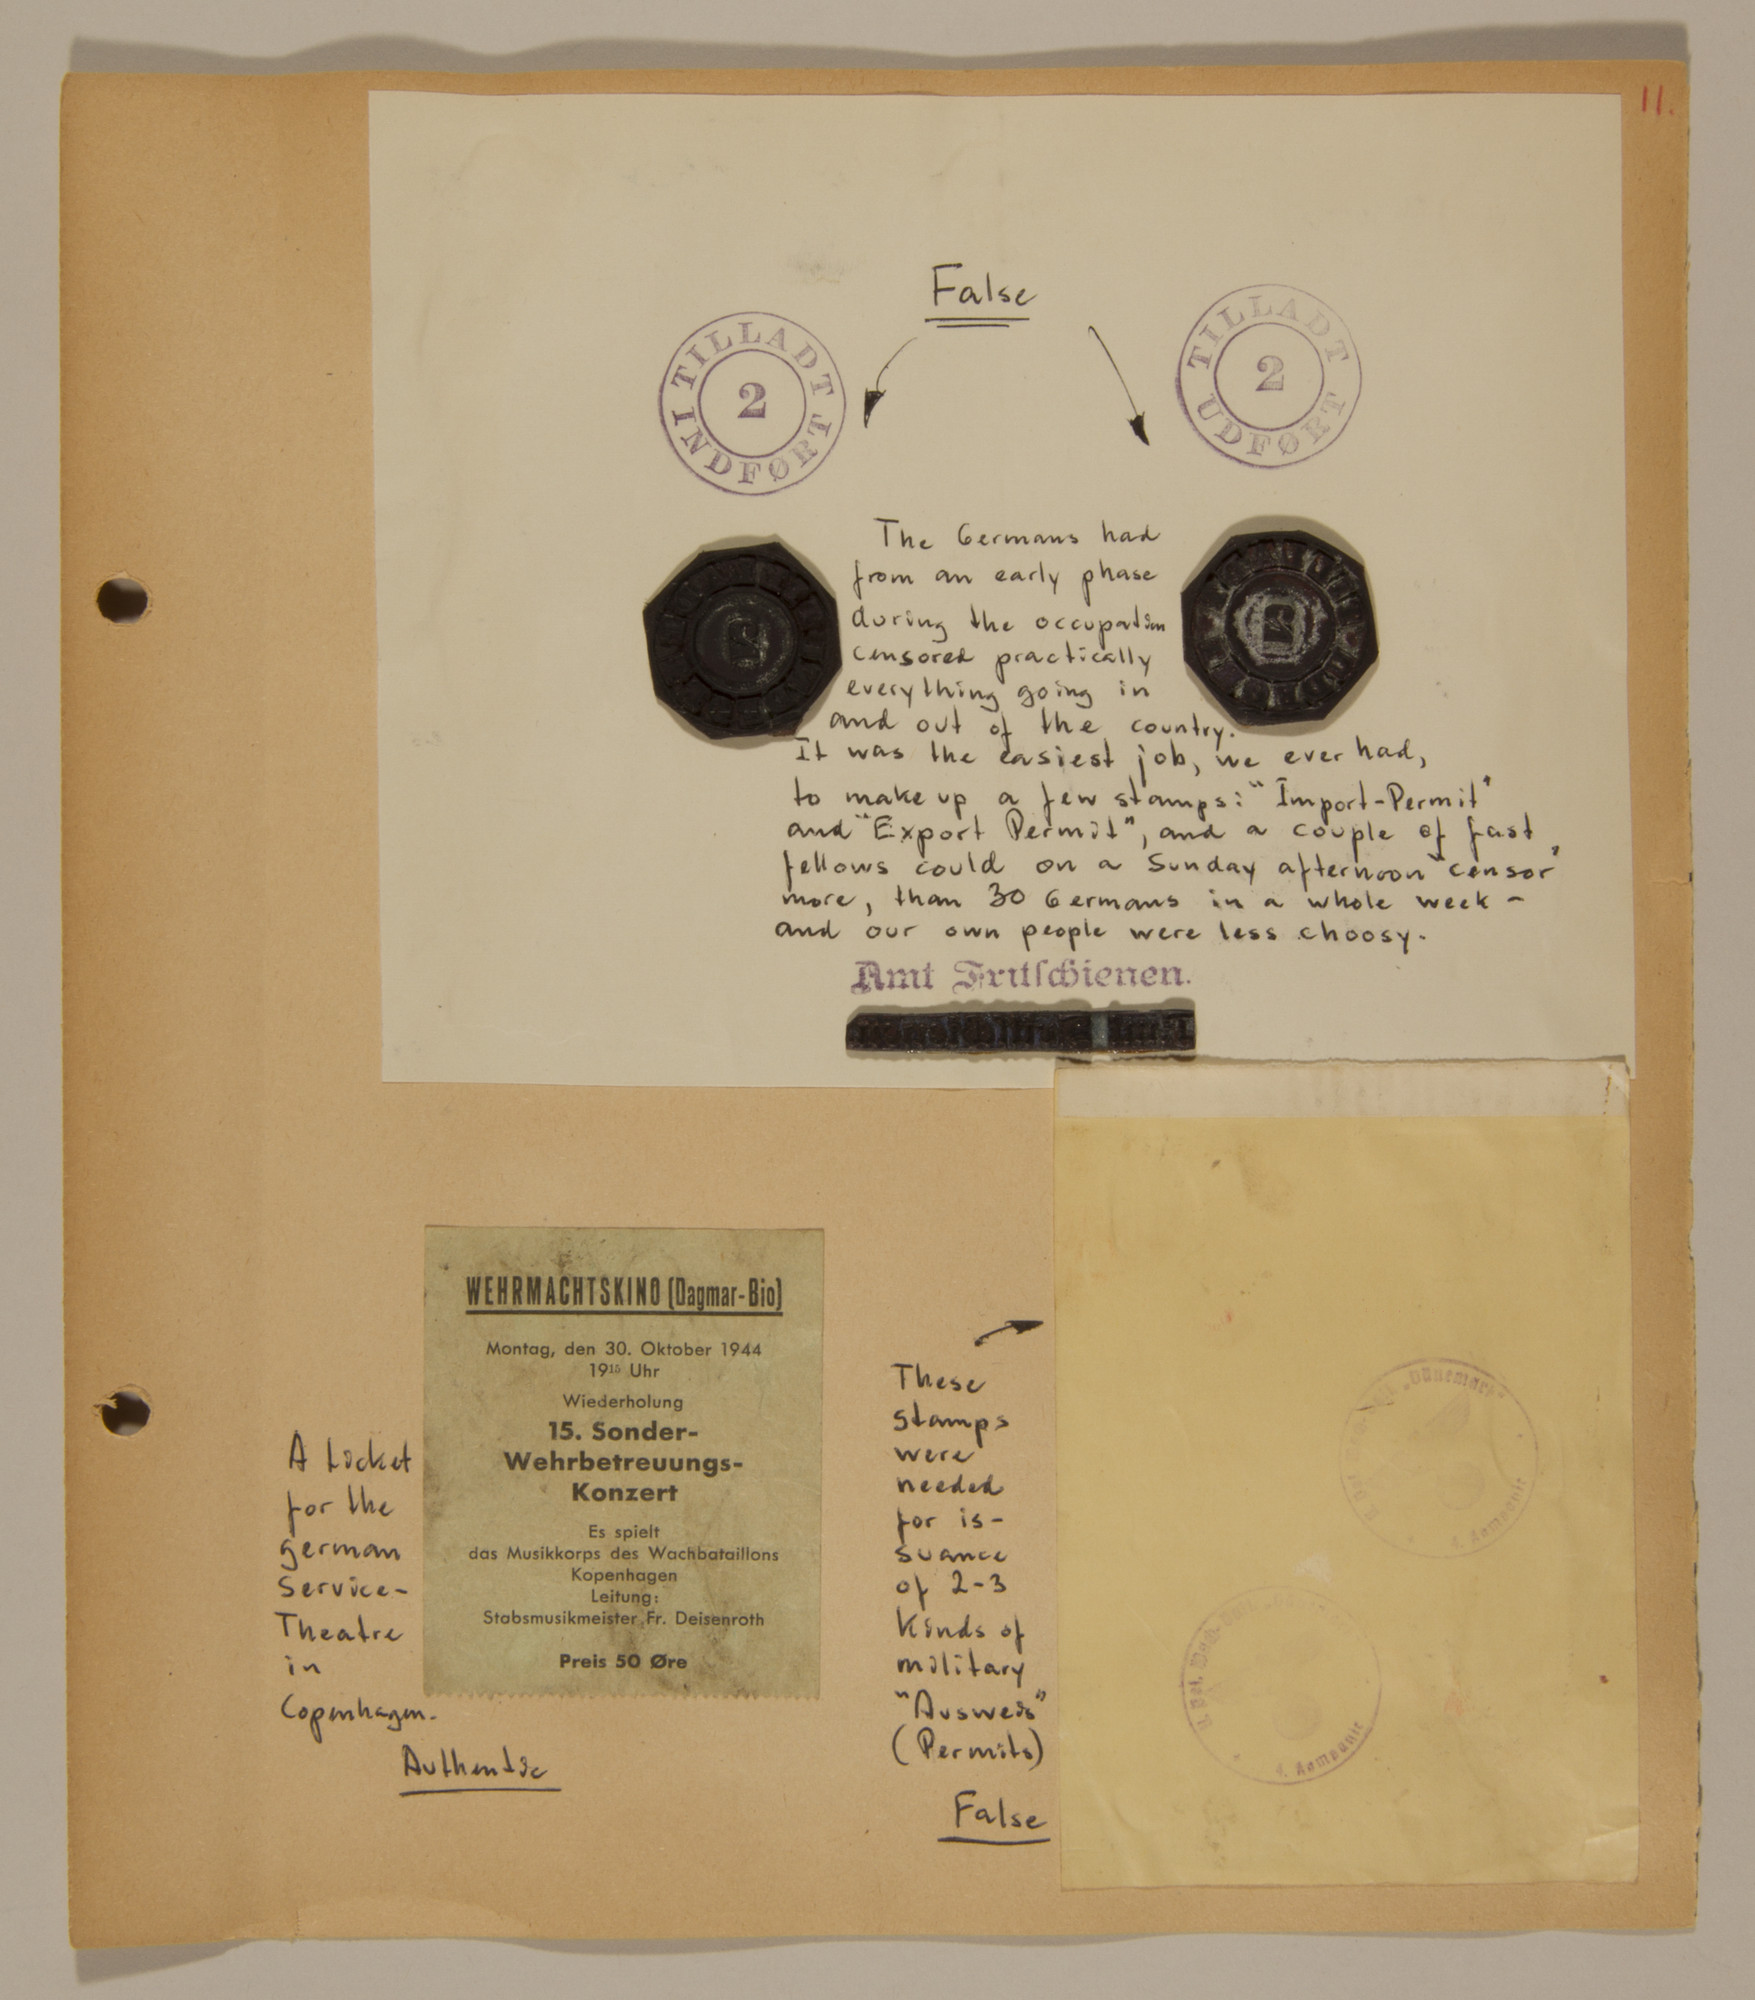 Page from volume three of a set of scrapbooks compiled by Bjorn Sibbern, a Danish policeman and resistance member, documenting the German occupation of Denmark.

This page contains forgery stamps for the creation of false documents.